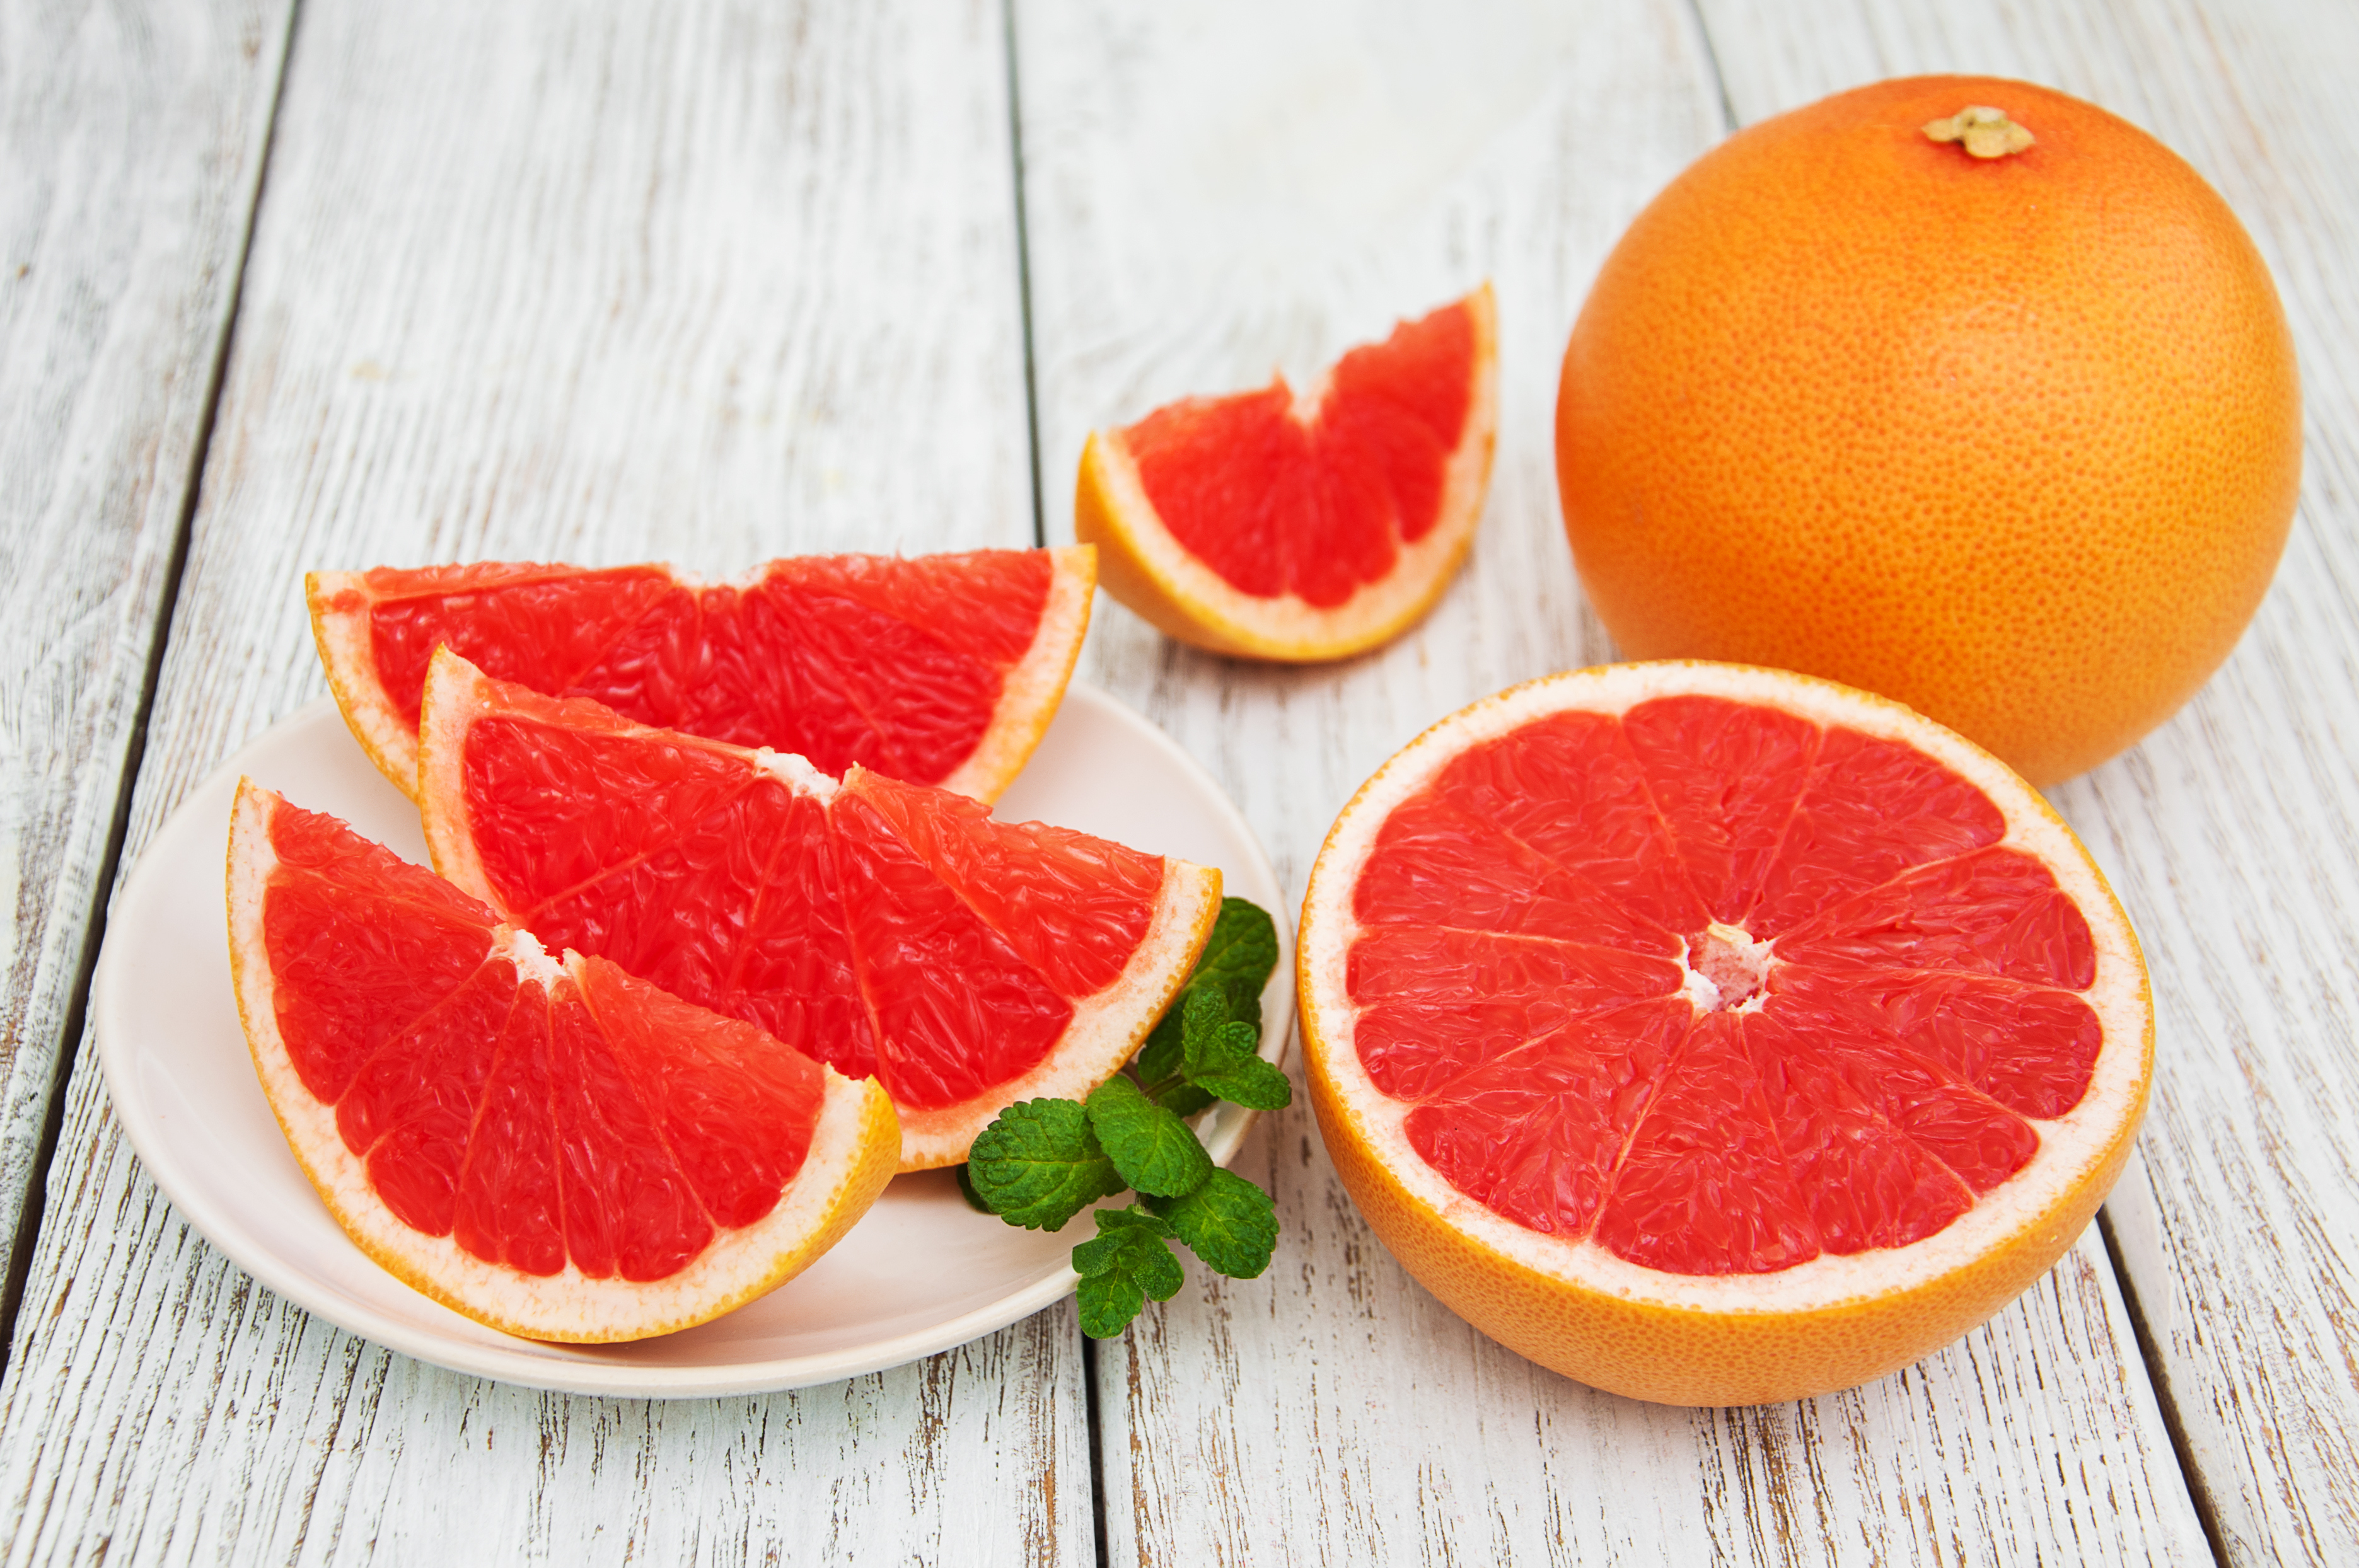 World New Easier Grapefruit Makes Diet Weight Plan: Lose | It Woman\'s Twist to